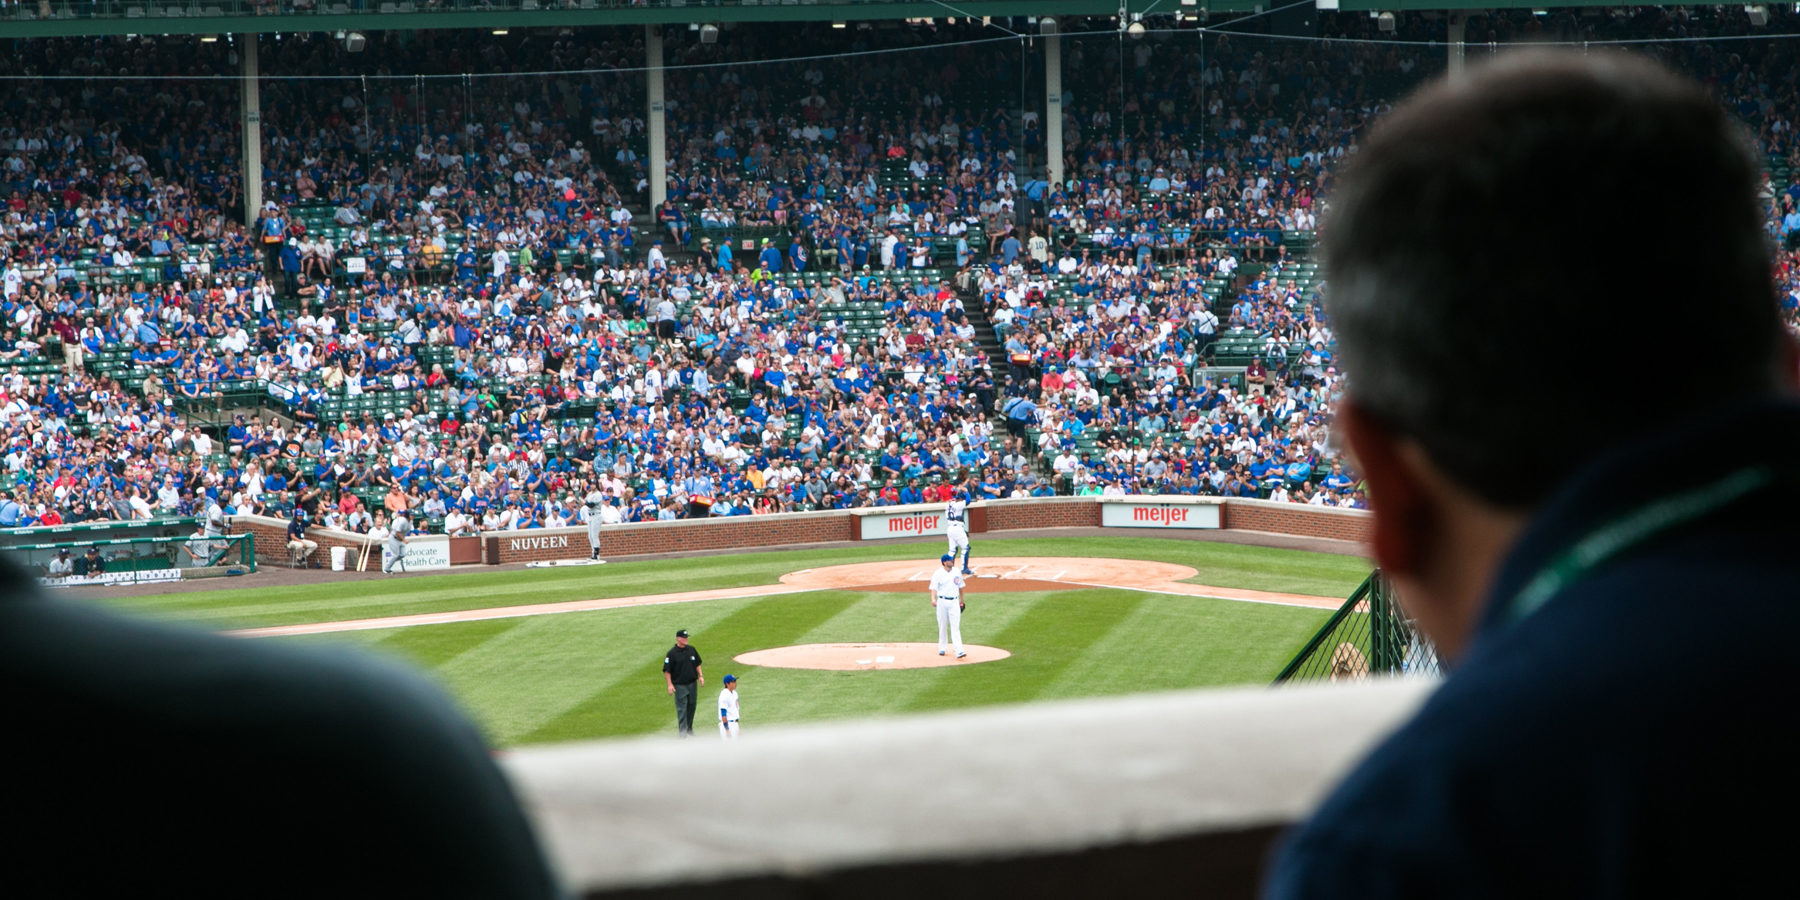 Chicago Cubs   Find Major League Baseball Games, Events & Traditions